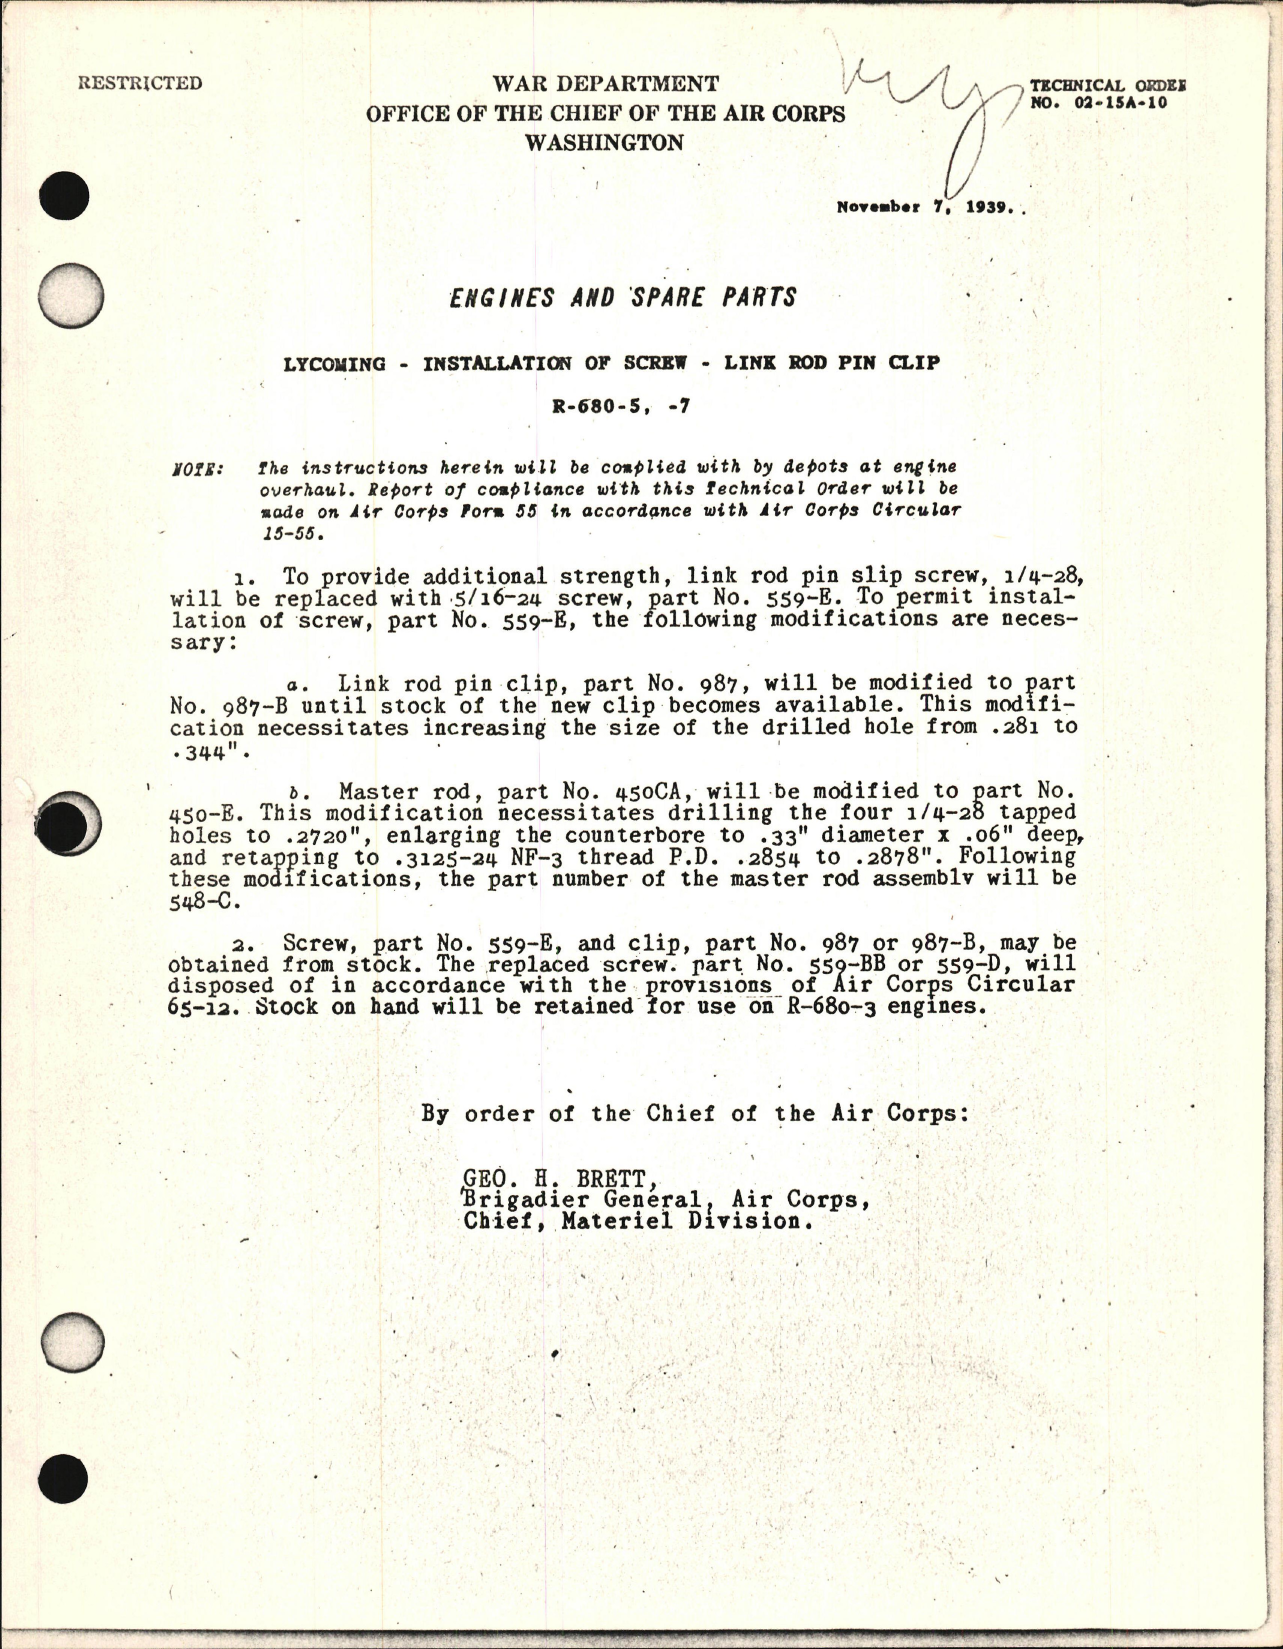 Sample page 1 from AirCorps Library document: Installation of Screw Link Rod Pin Clip for R-680-5 and -7